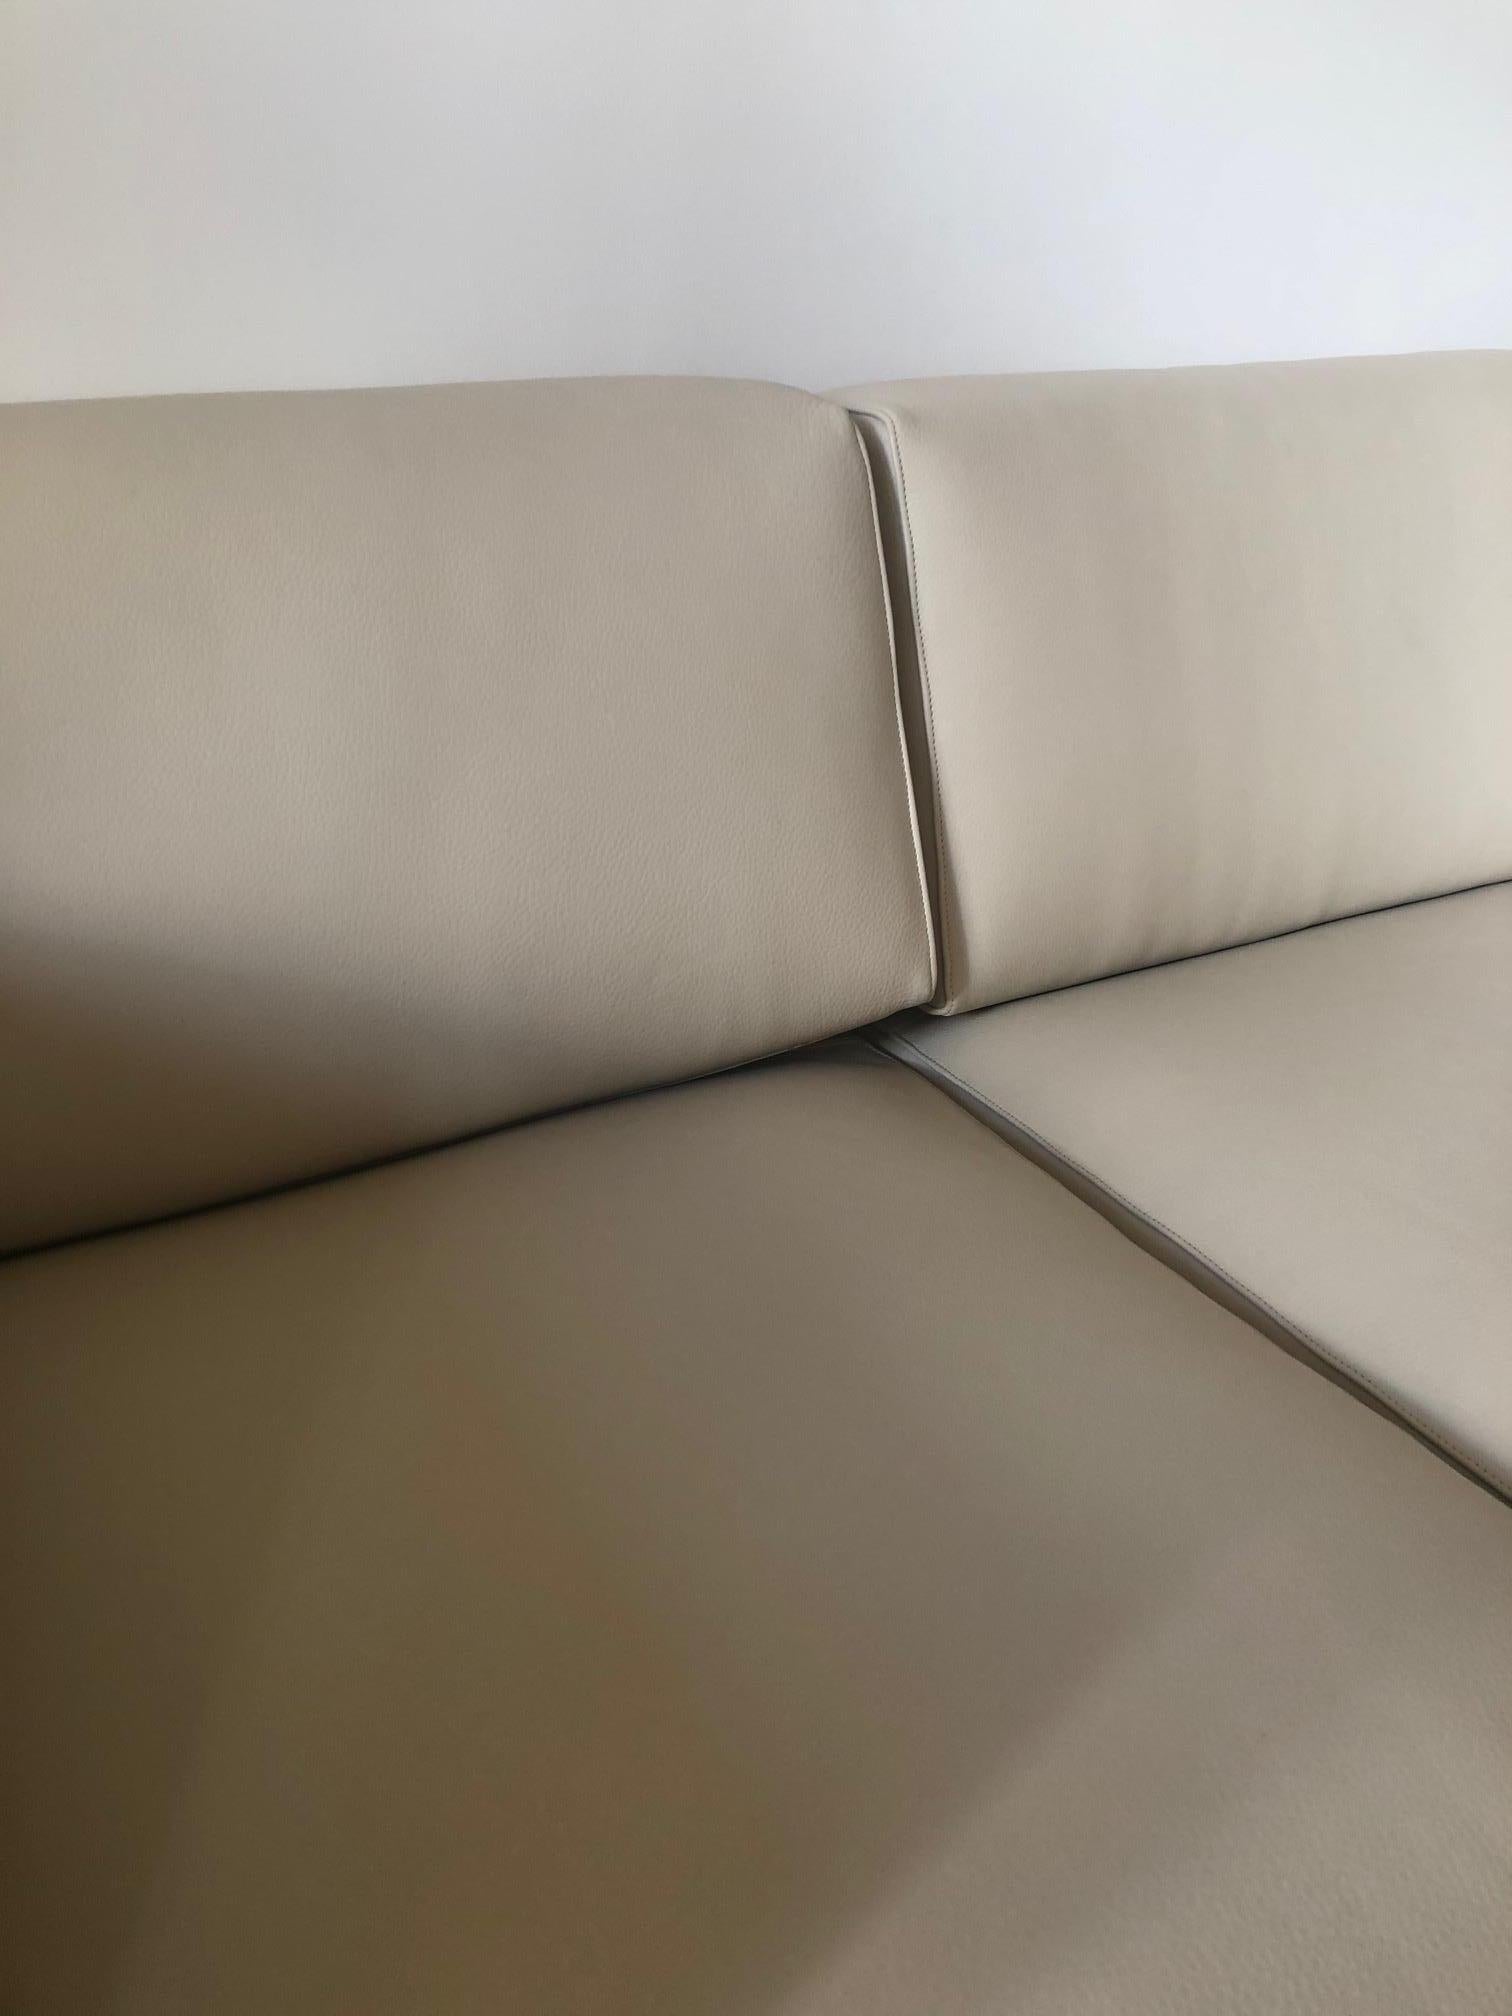 Afra and Tobia Scarpa
Bastiano sofa (created in 1962)
Knoll Edition
1975
Restored cream-coloured leather and original period solid wood 
In perfect condition! 

153 x 80 x 65 cms
